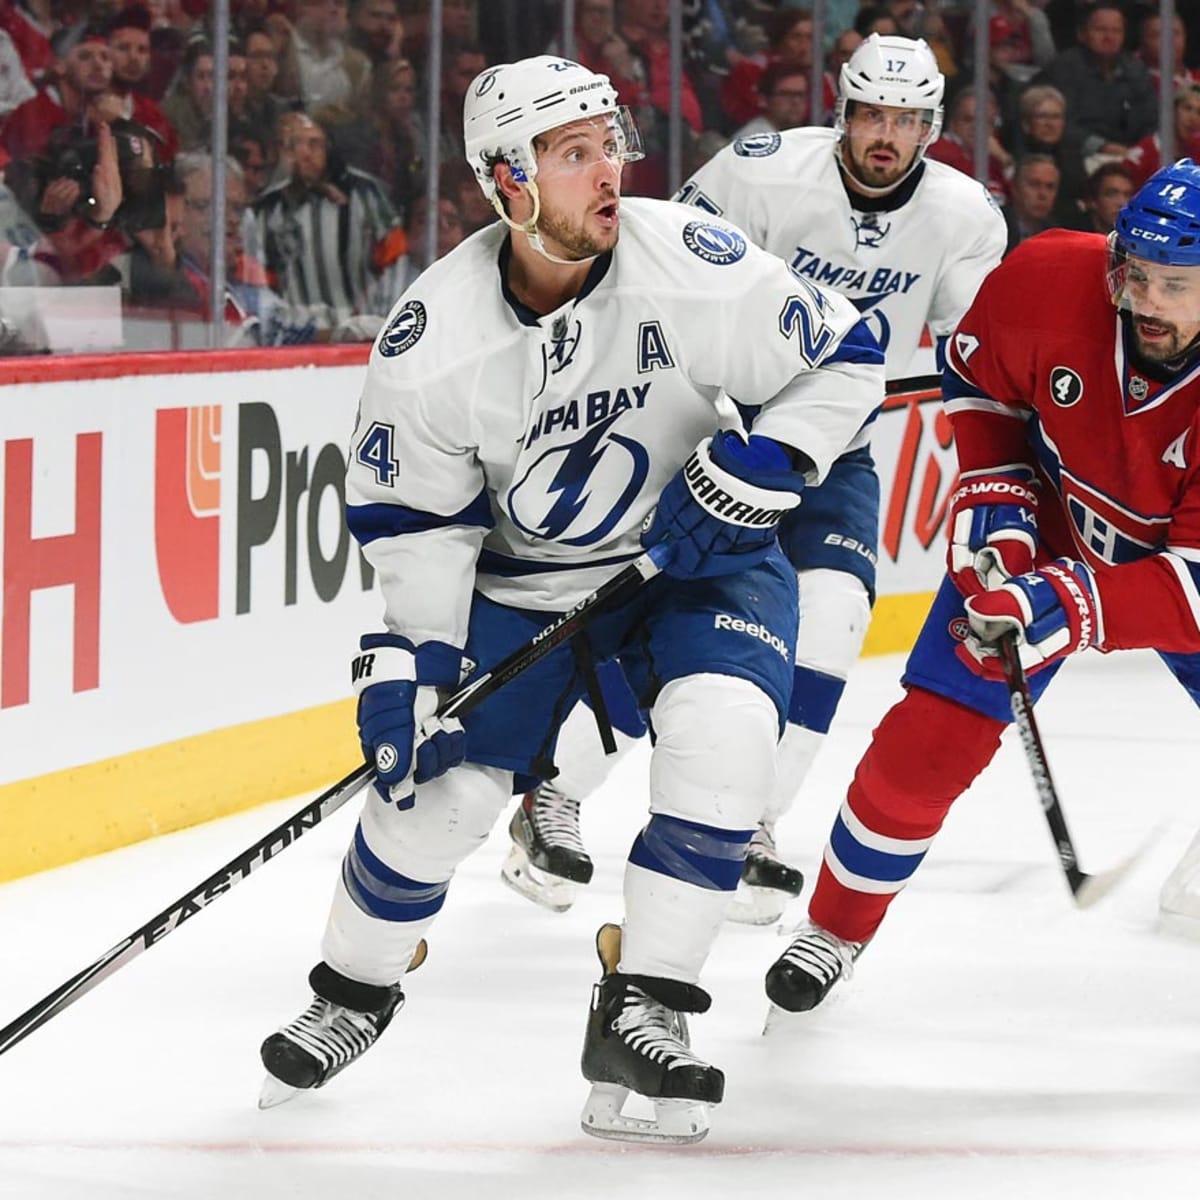 Ryan Callahan may be forced to retire from NHL due to injury